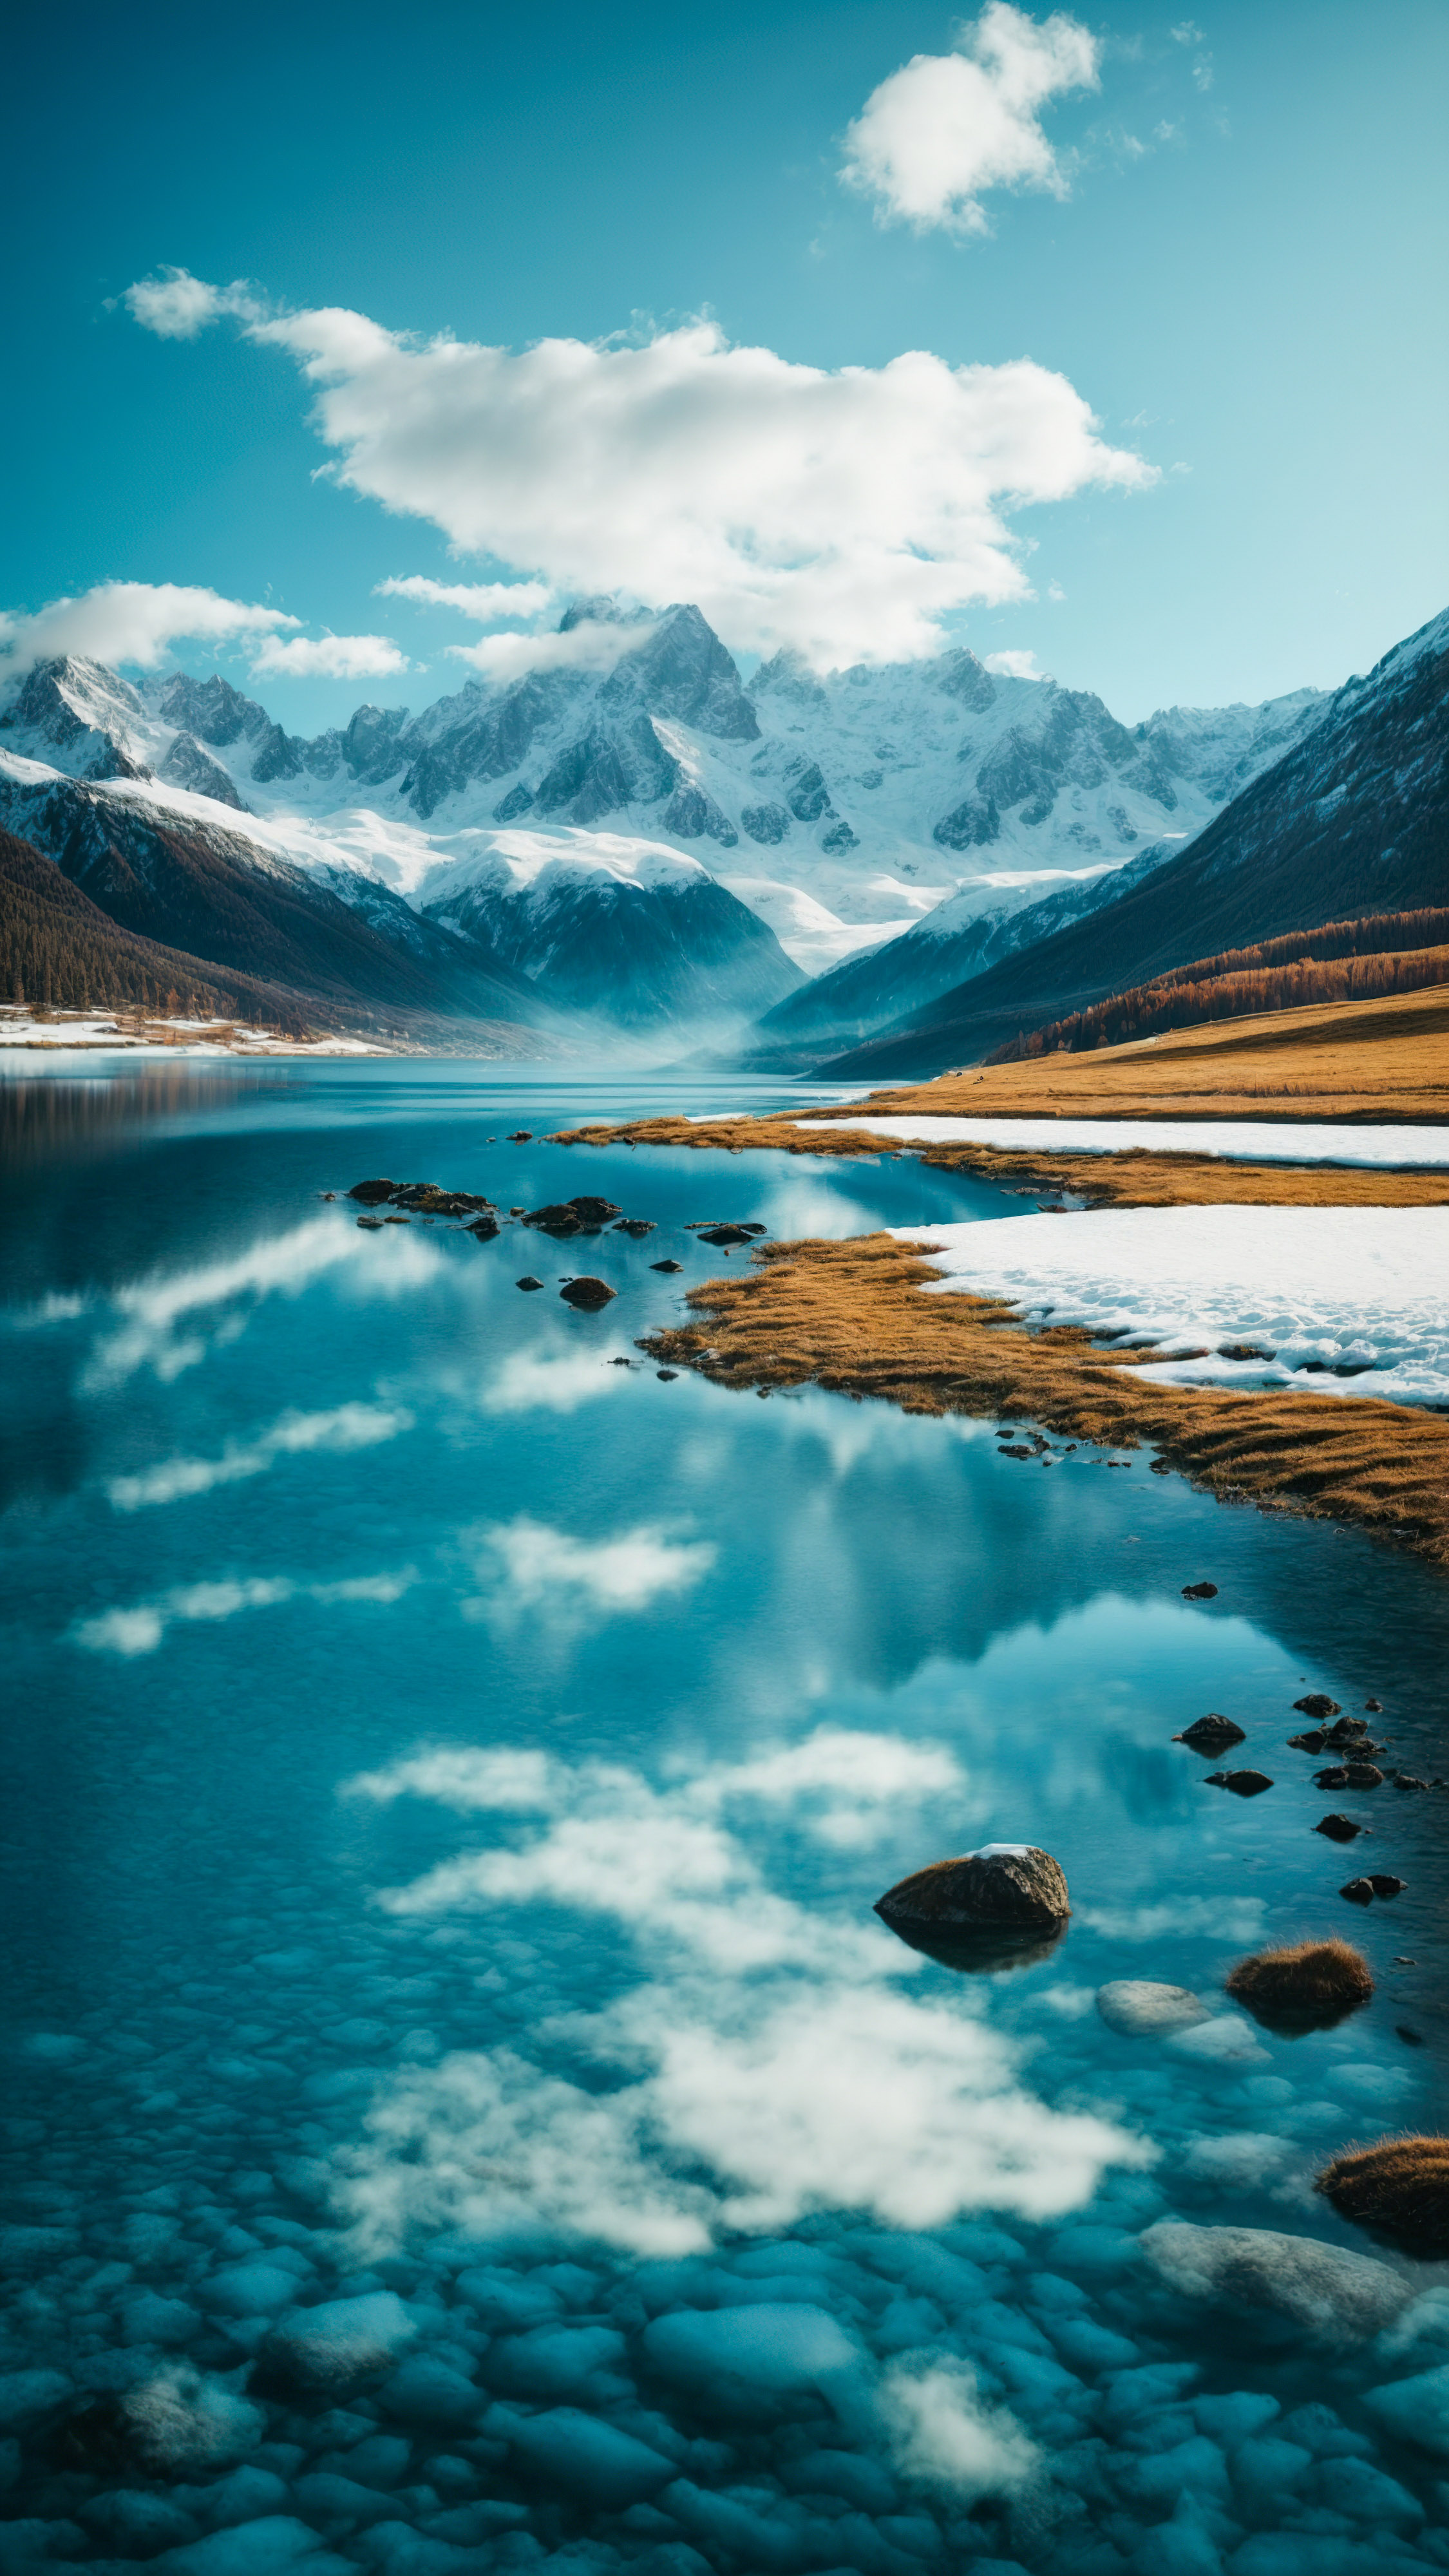 Get captivated by the panoramic view of snowy mountains and the blue sky, with a calm lake reflecting the scenery, with our wallpaper for iPhone mountains.